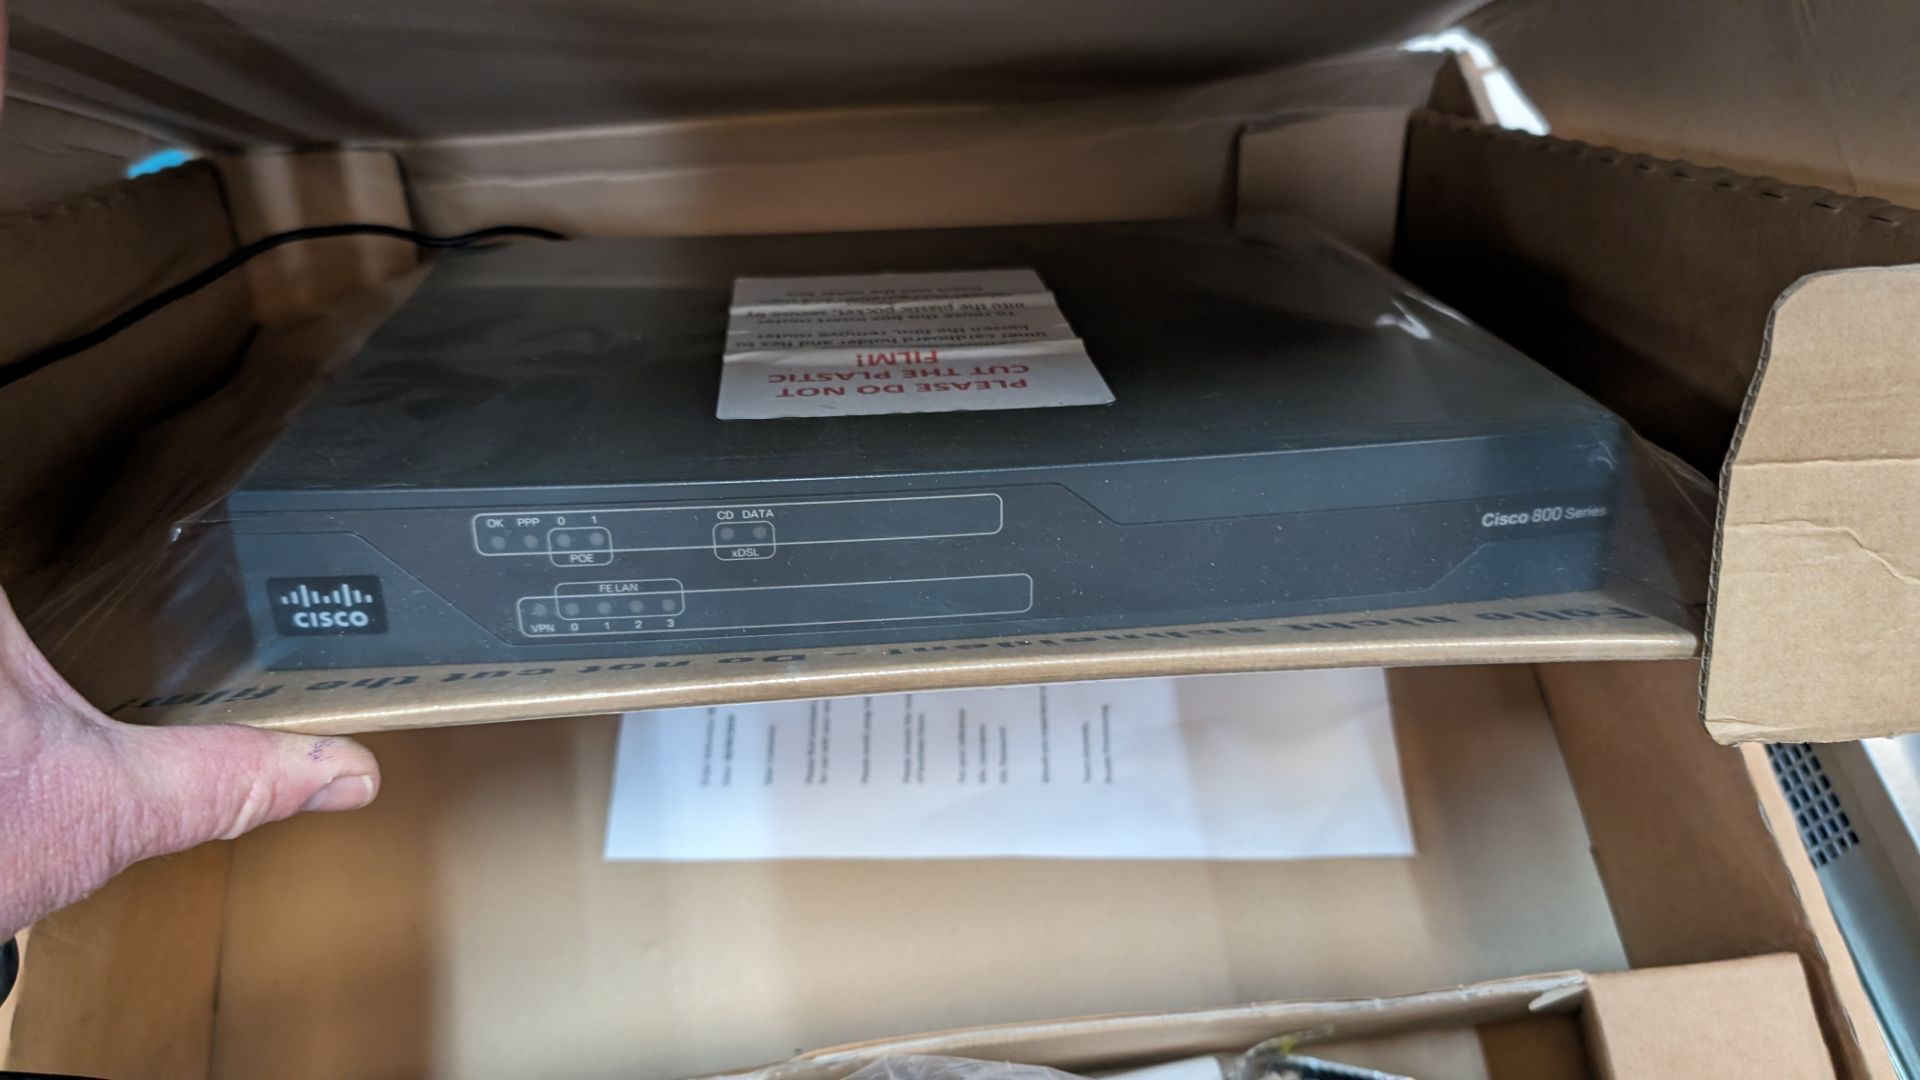 Cisco 887VAM broadband router including power pack & cables - appears to be new/unused - Image 2 of 8